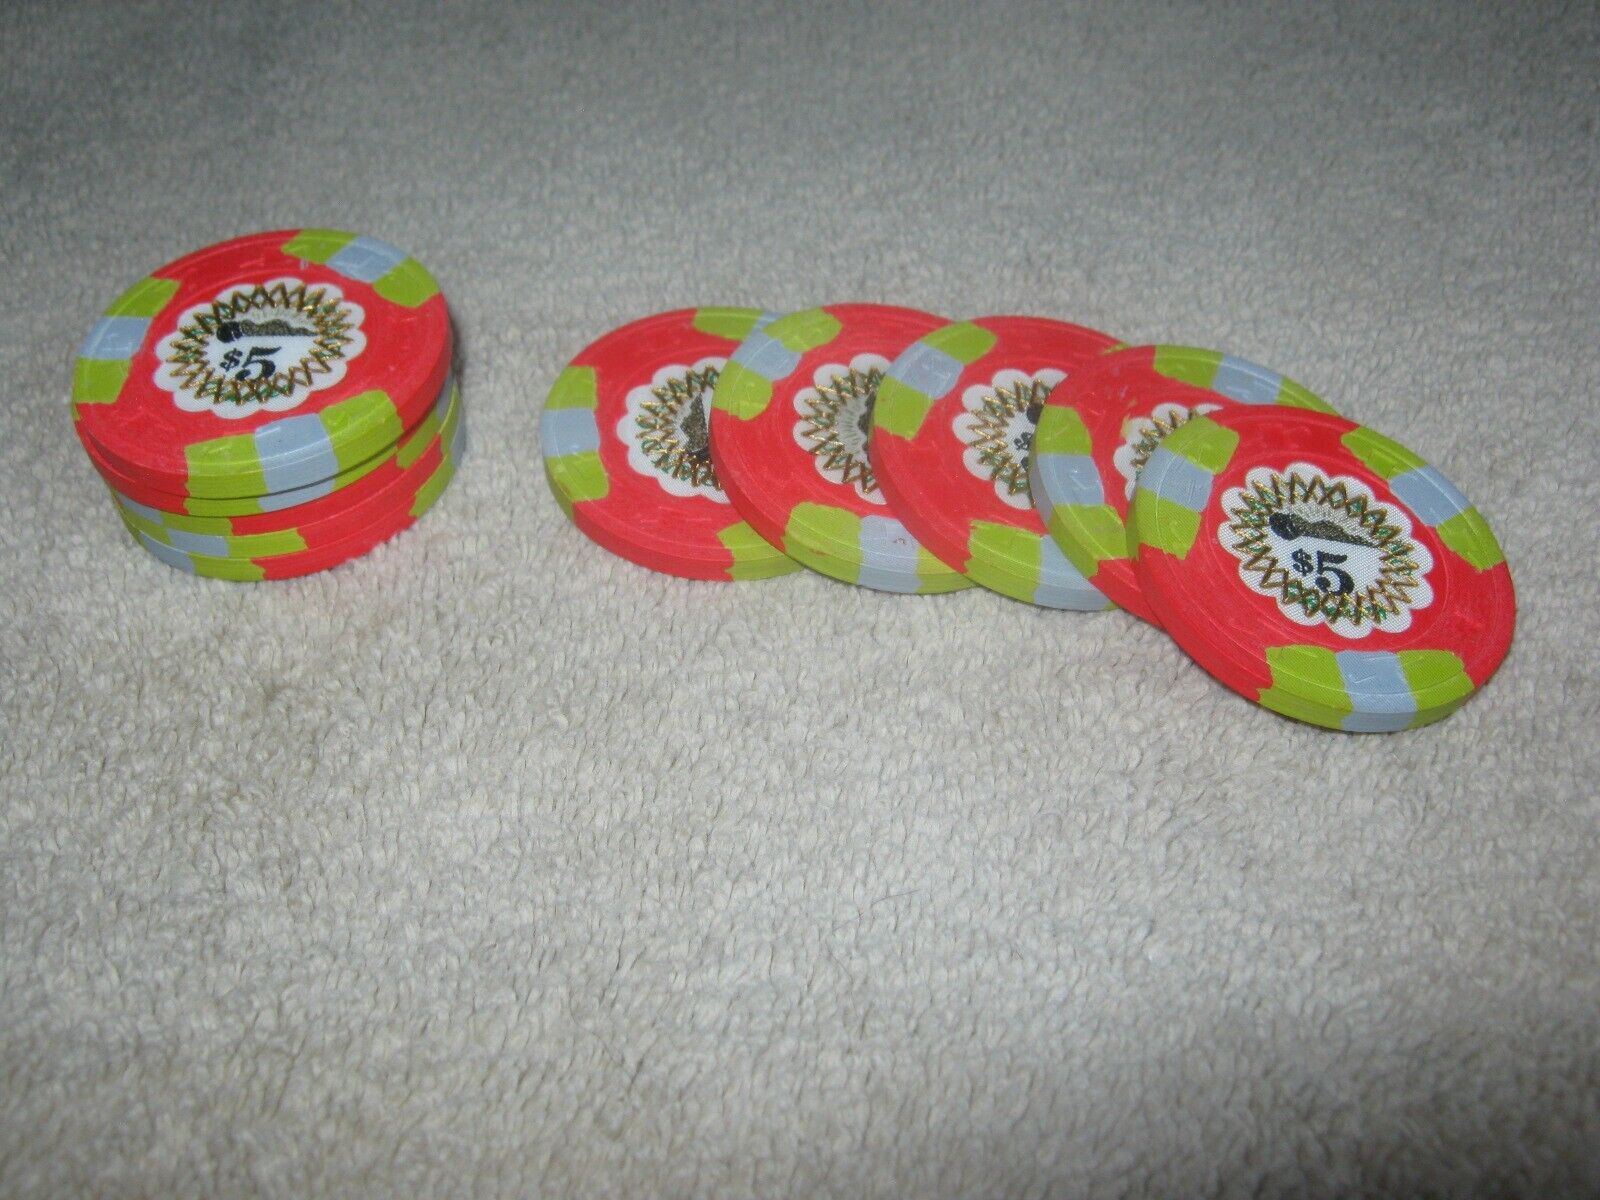 SPECIAL PAULSON CASINO CHIPS - Grand Casino,  $5 RED Units